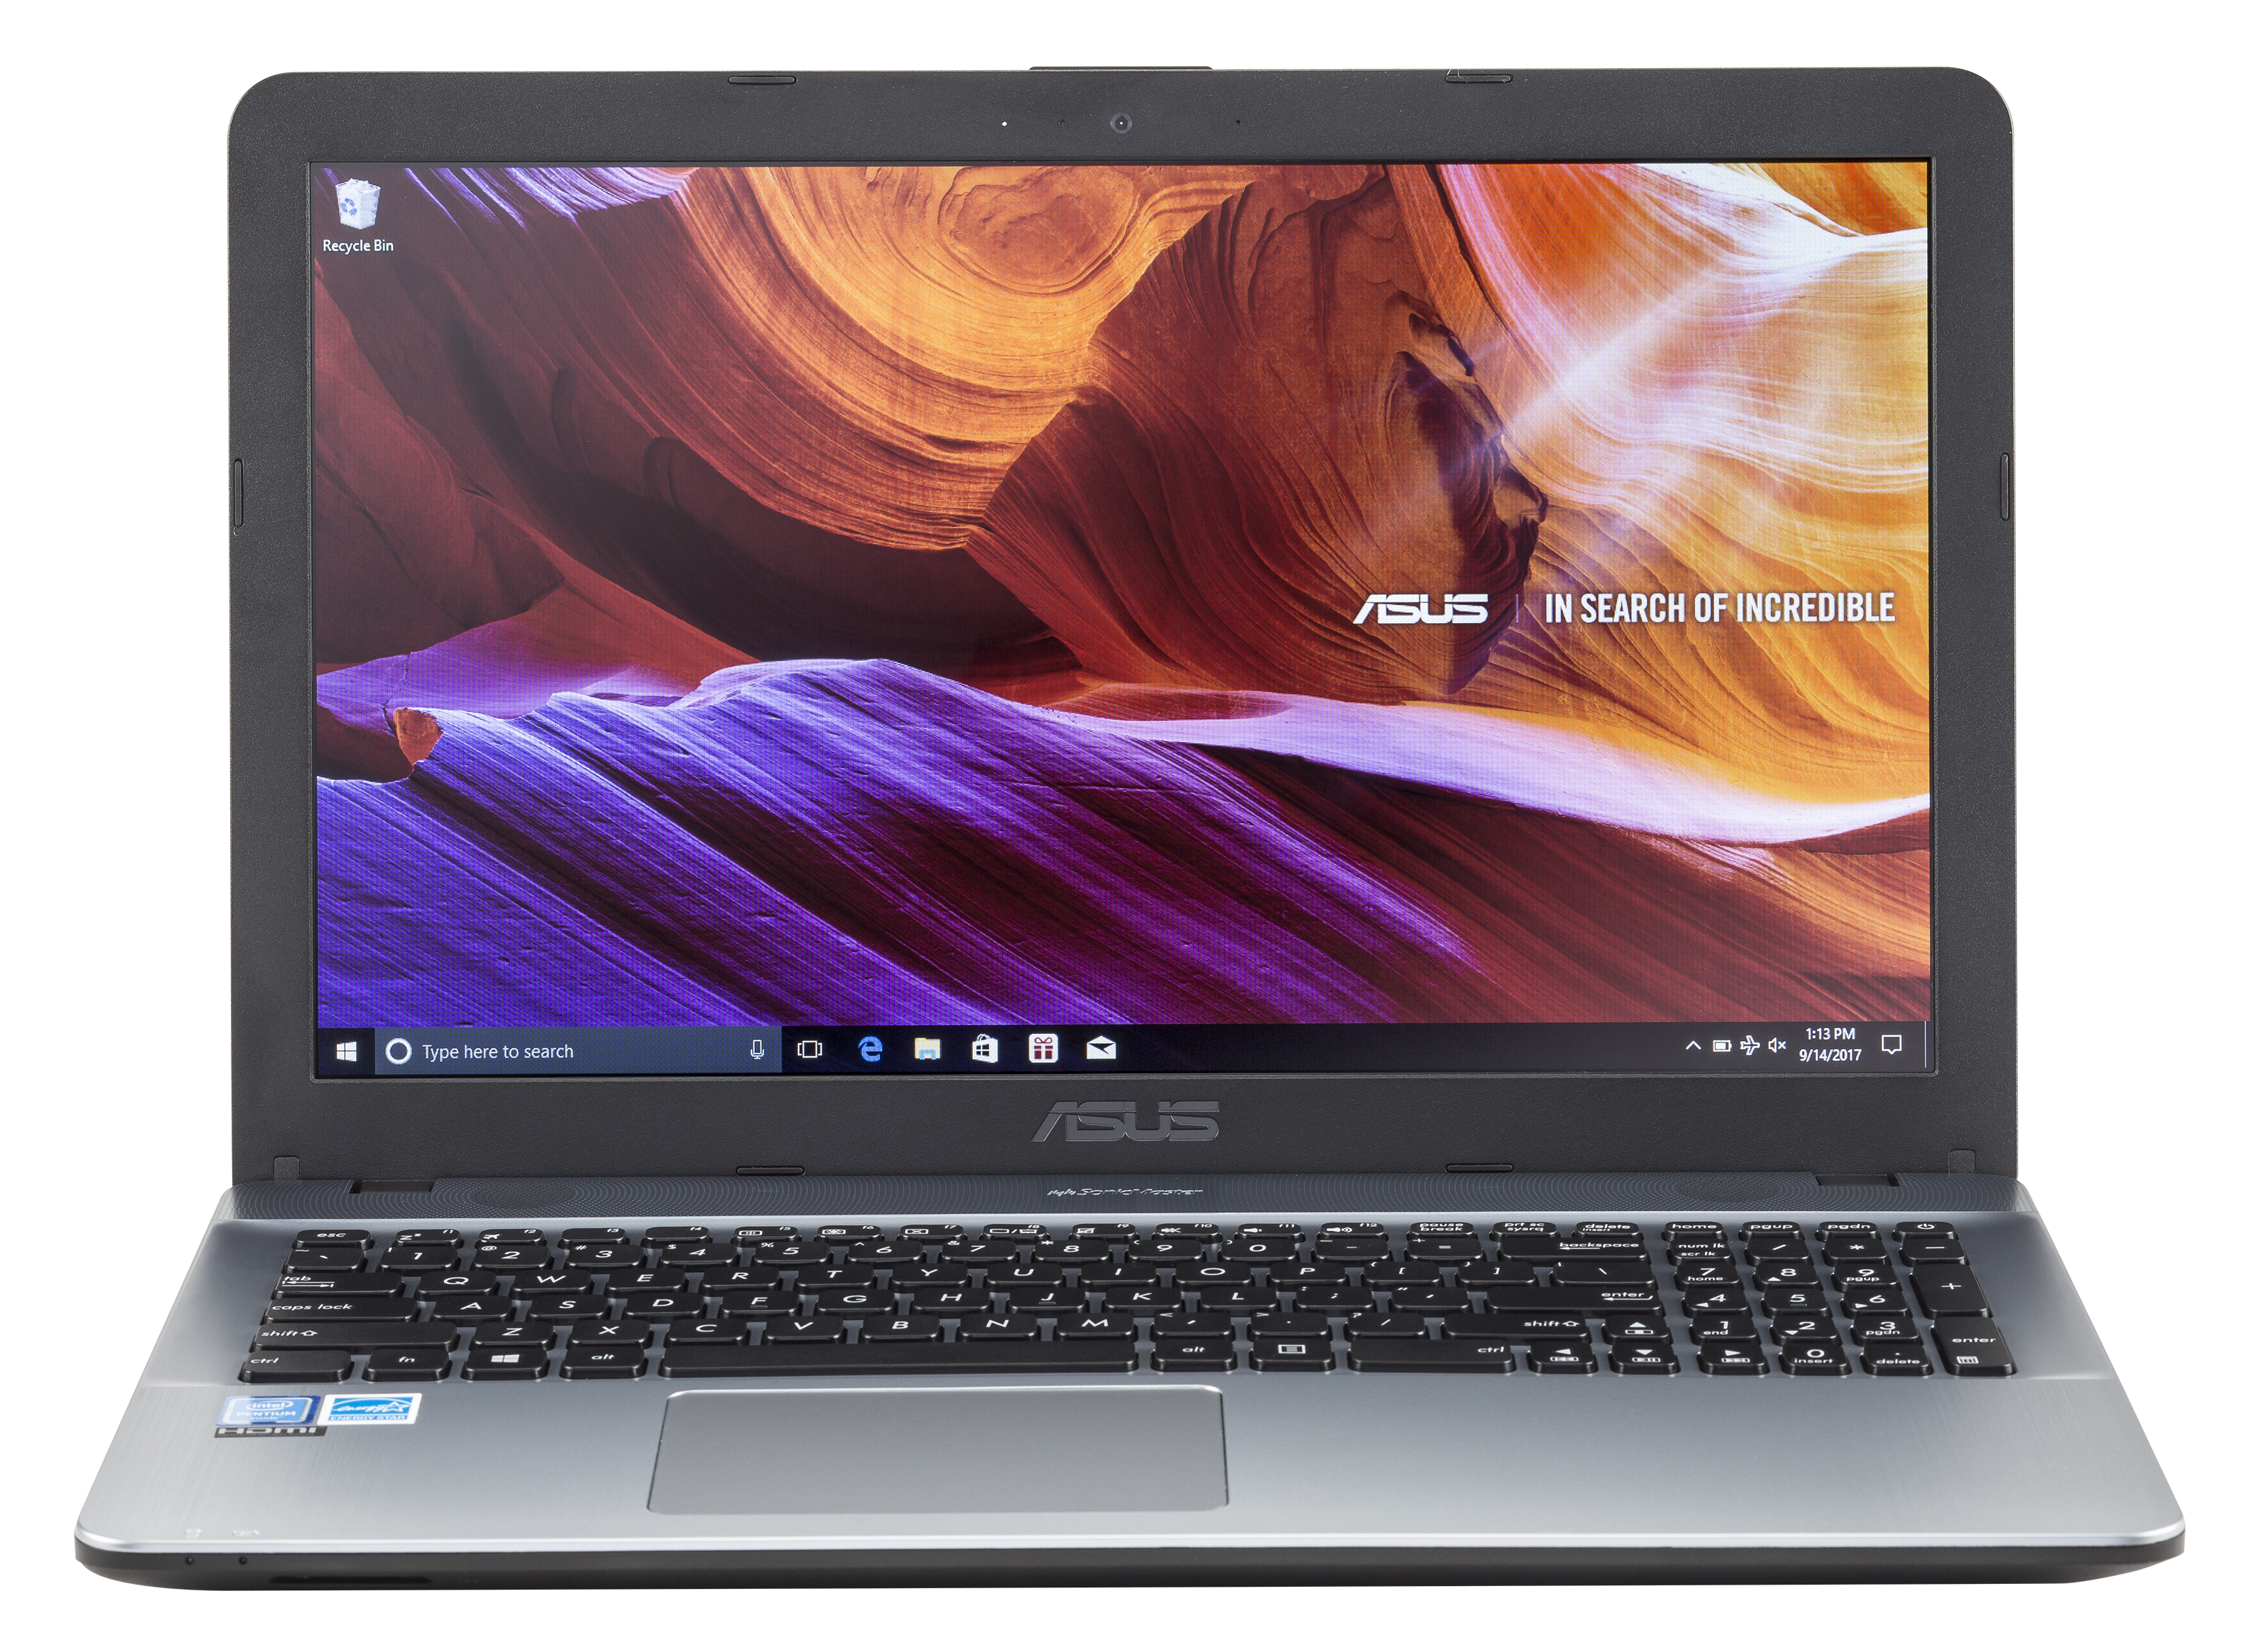 Asus vivobook go e1504. ASUS x541. ASUS VIVOBOOK 541. ASUS VIVOBOOK Max x541sa. ASUS in search of incredible ноутбук.